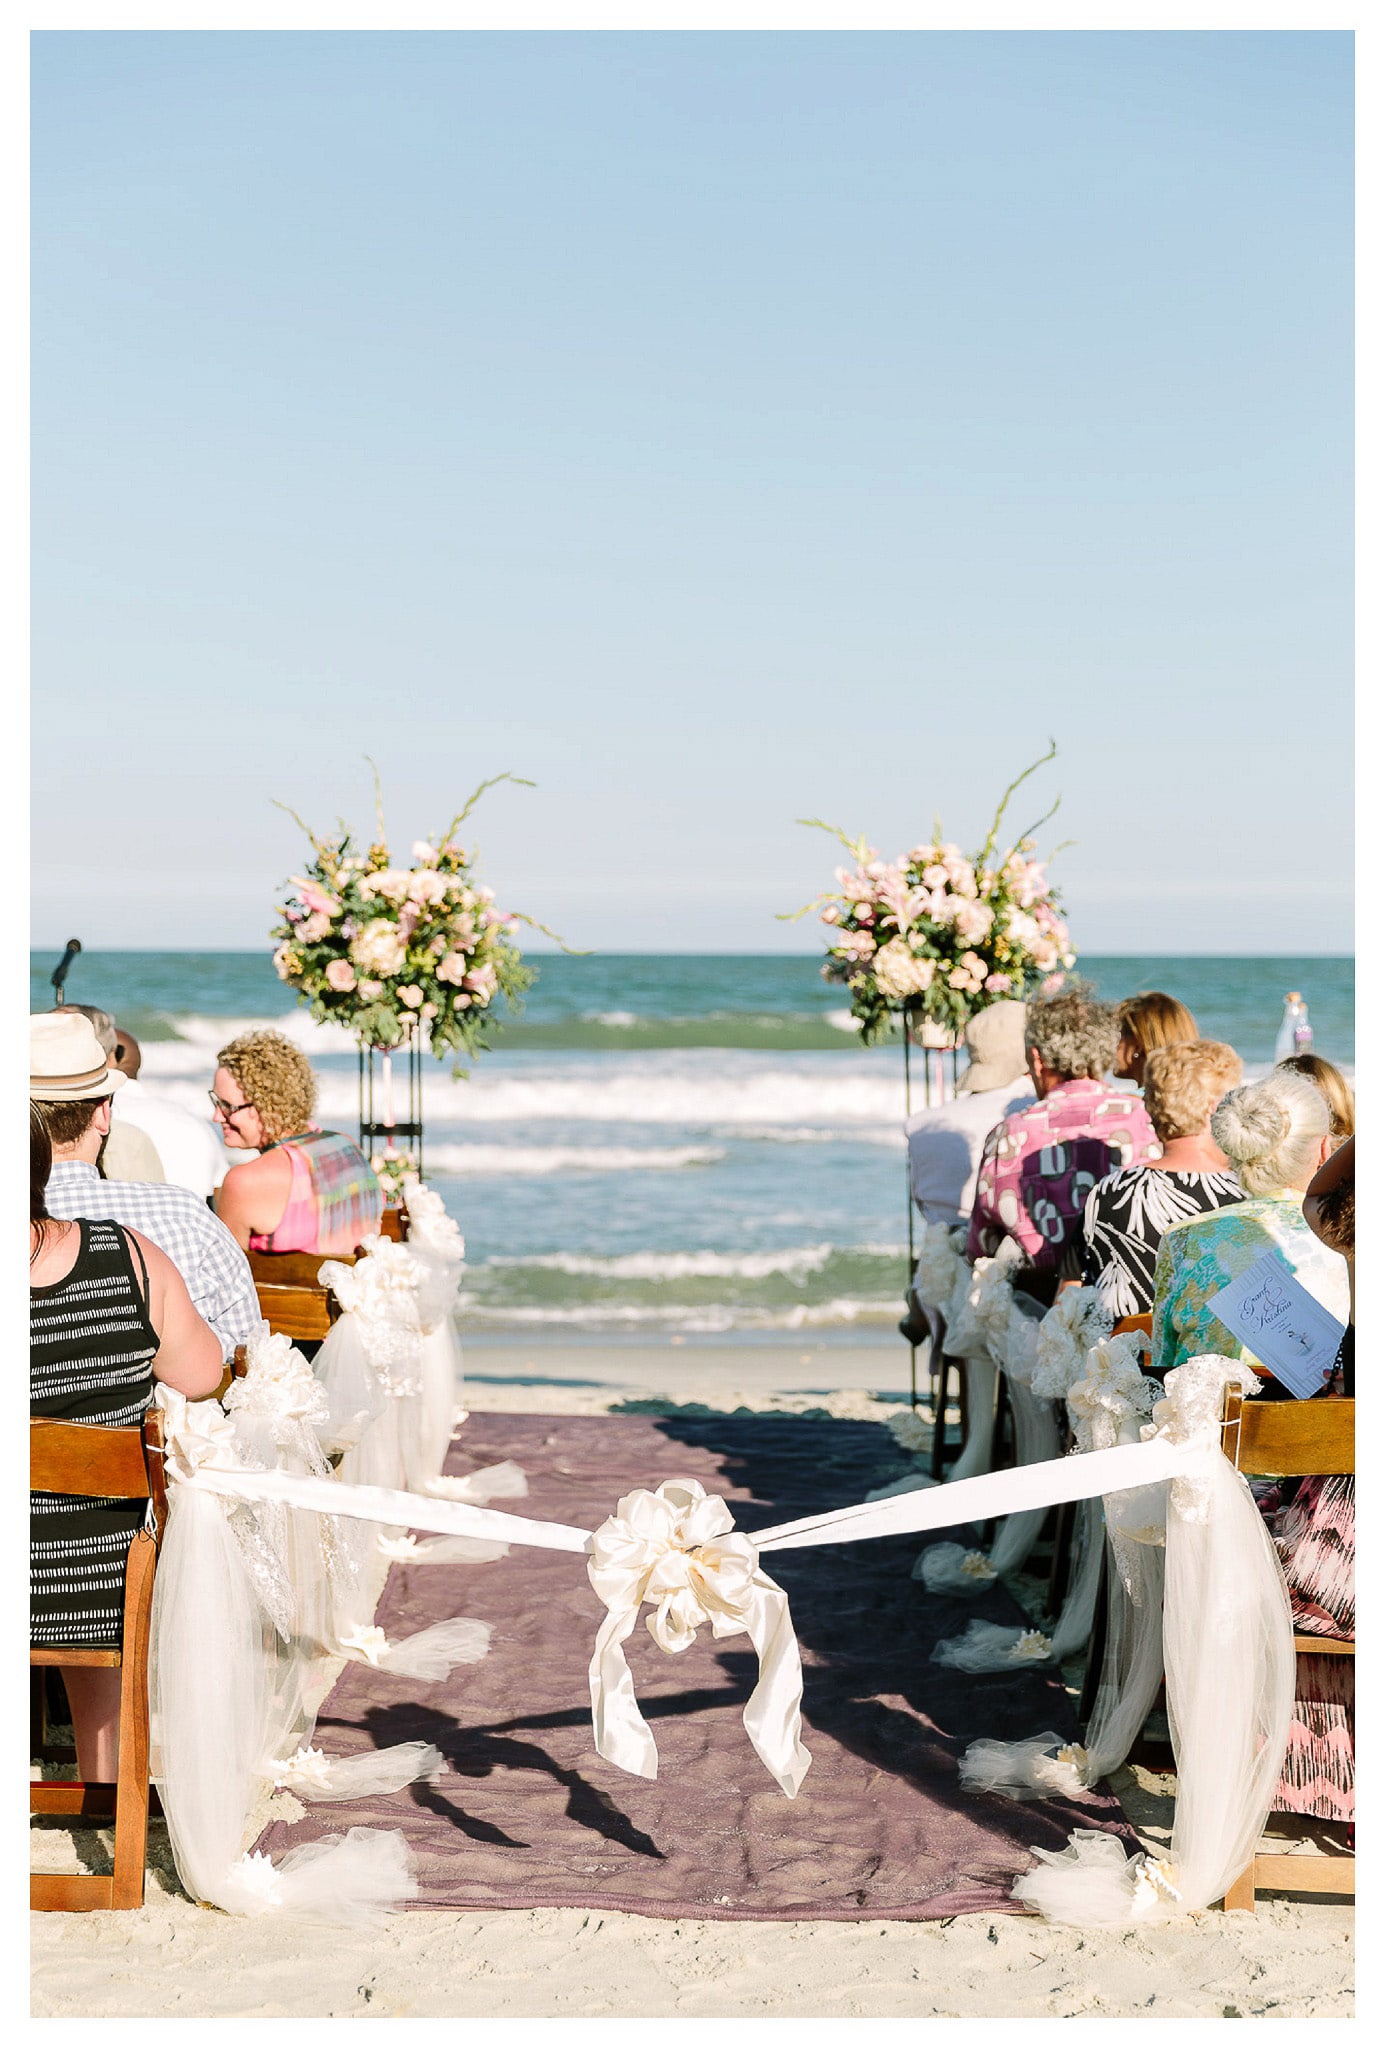 Looking down the aisle and into the ocean - Beach wedding ceremony in Myrtle Beach, South Carolina - Venue - Beach House Gulf Stream Breeze, Beach Realty Catering and Cake - Buttercream Cakes and Catering, LLC Flowers - Callas Florist Event Rentals - Event Works DJ - Scott Shaw